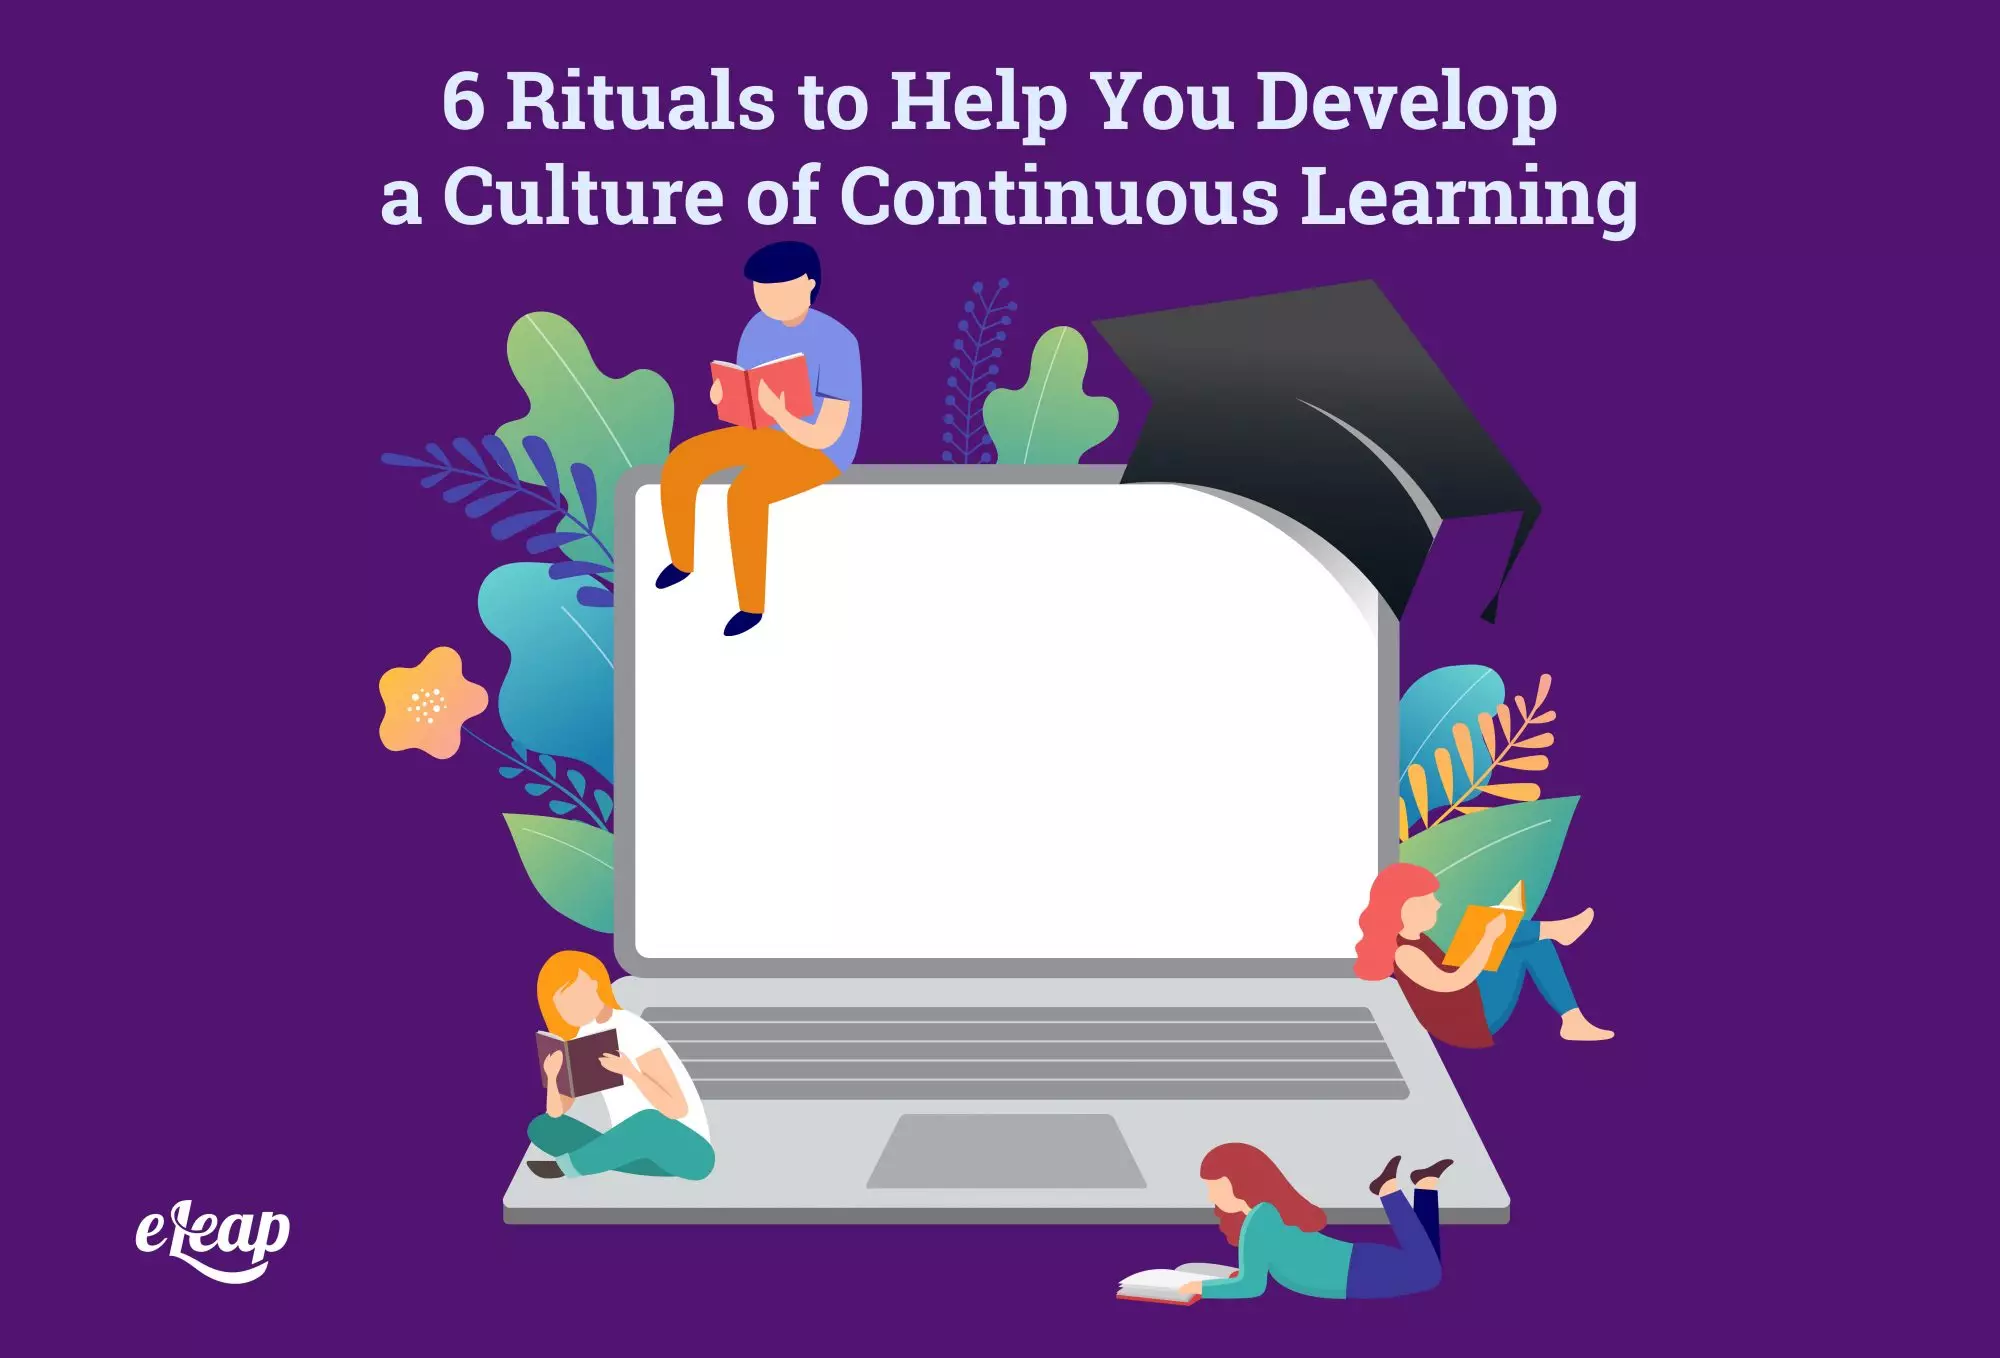 6 Rituals to Help You Develop a Culture of Continuous Learning